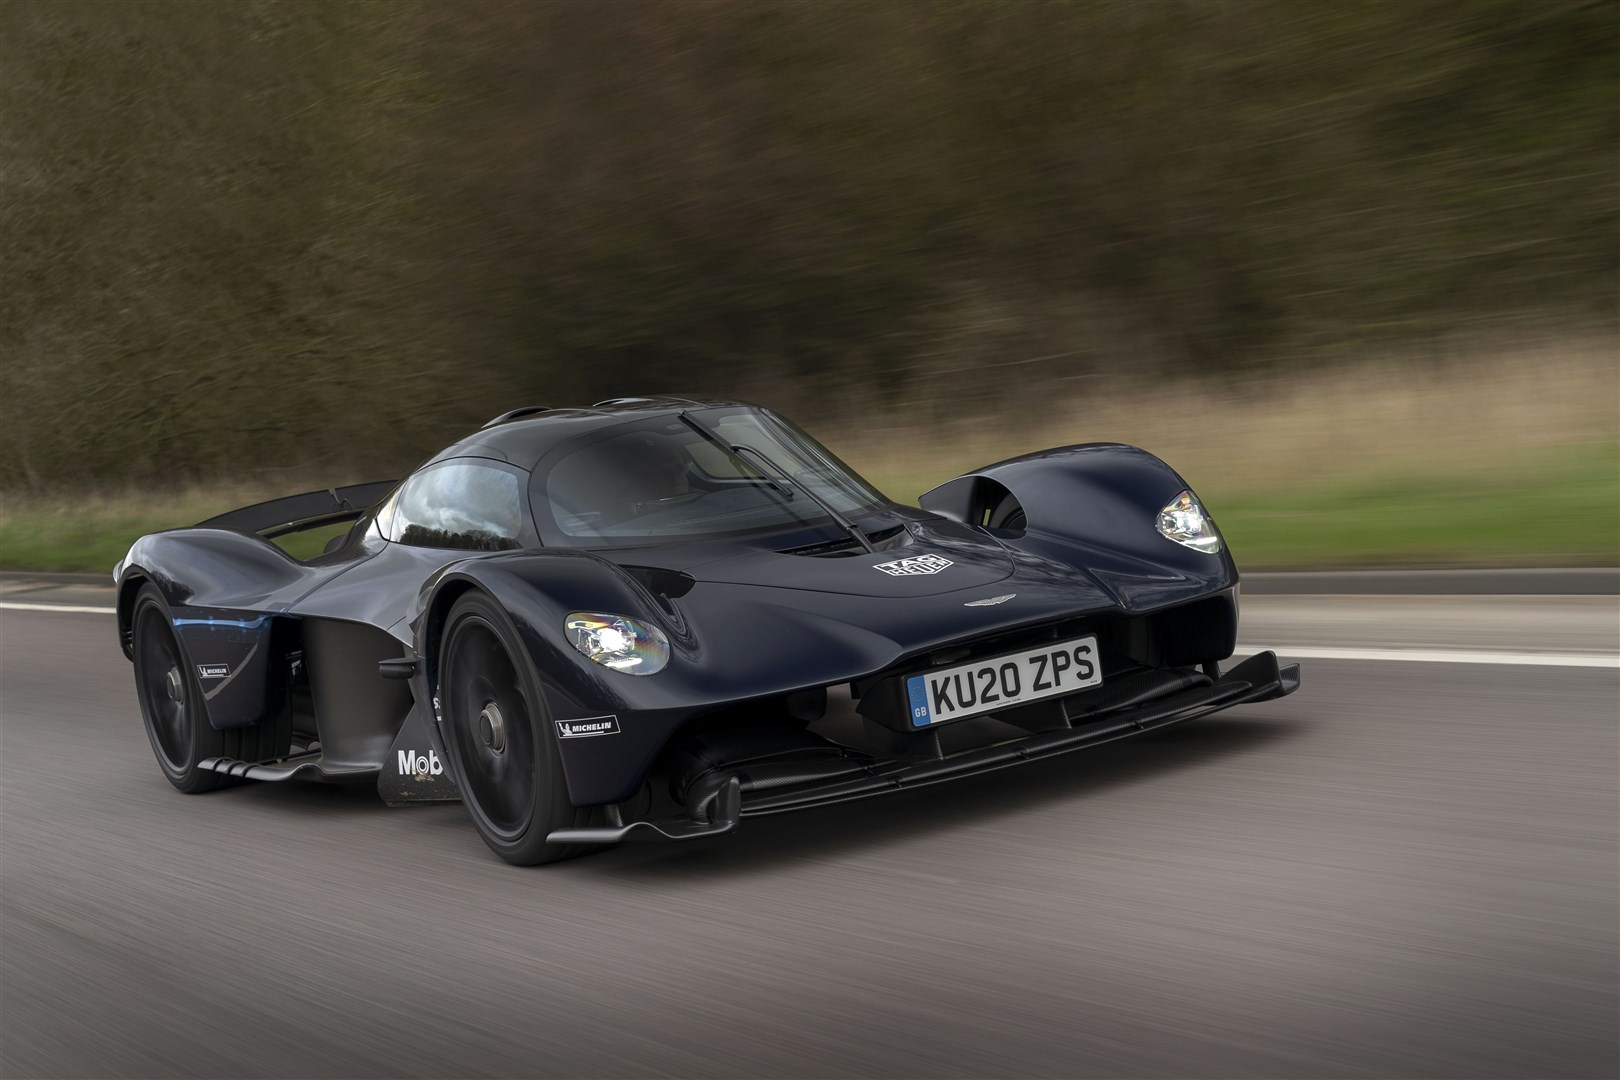 Aston Martin is suing a dealership over deposits taken on its Valkyrie hypercar (Aston Martin/PA)